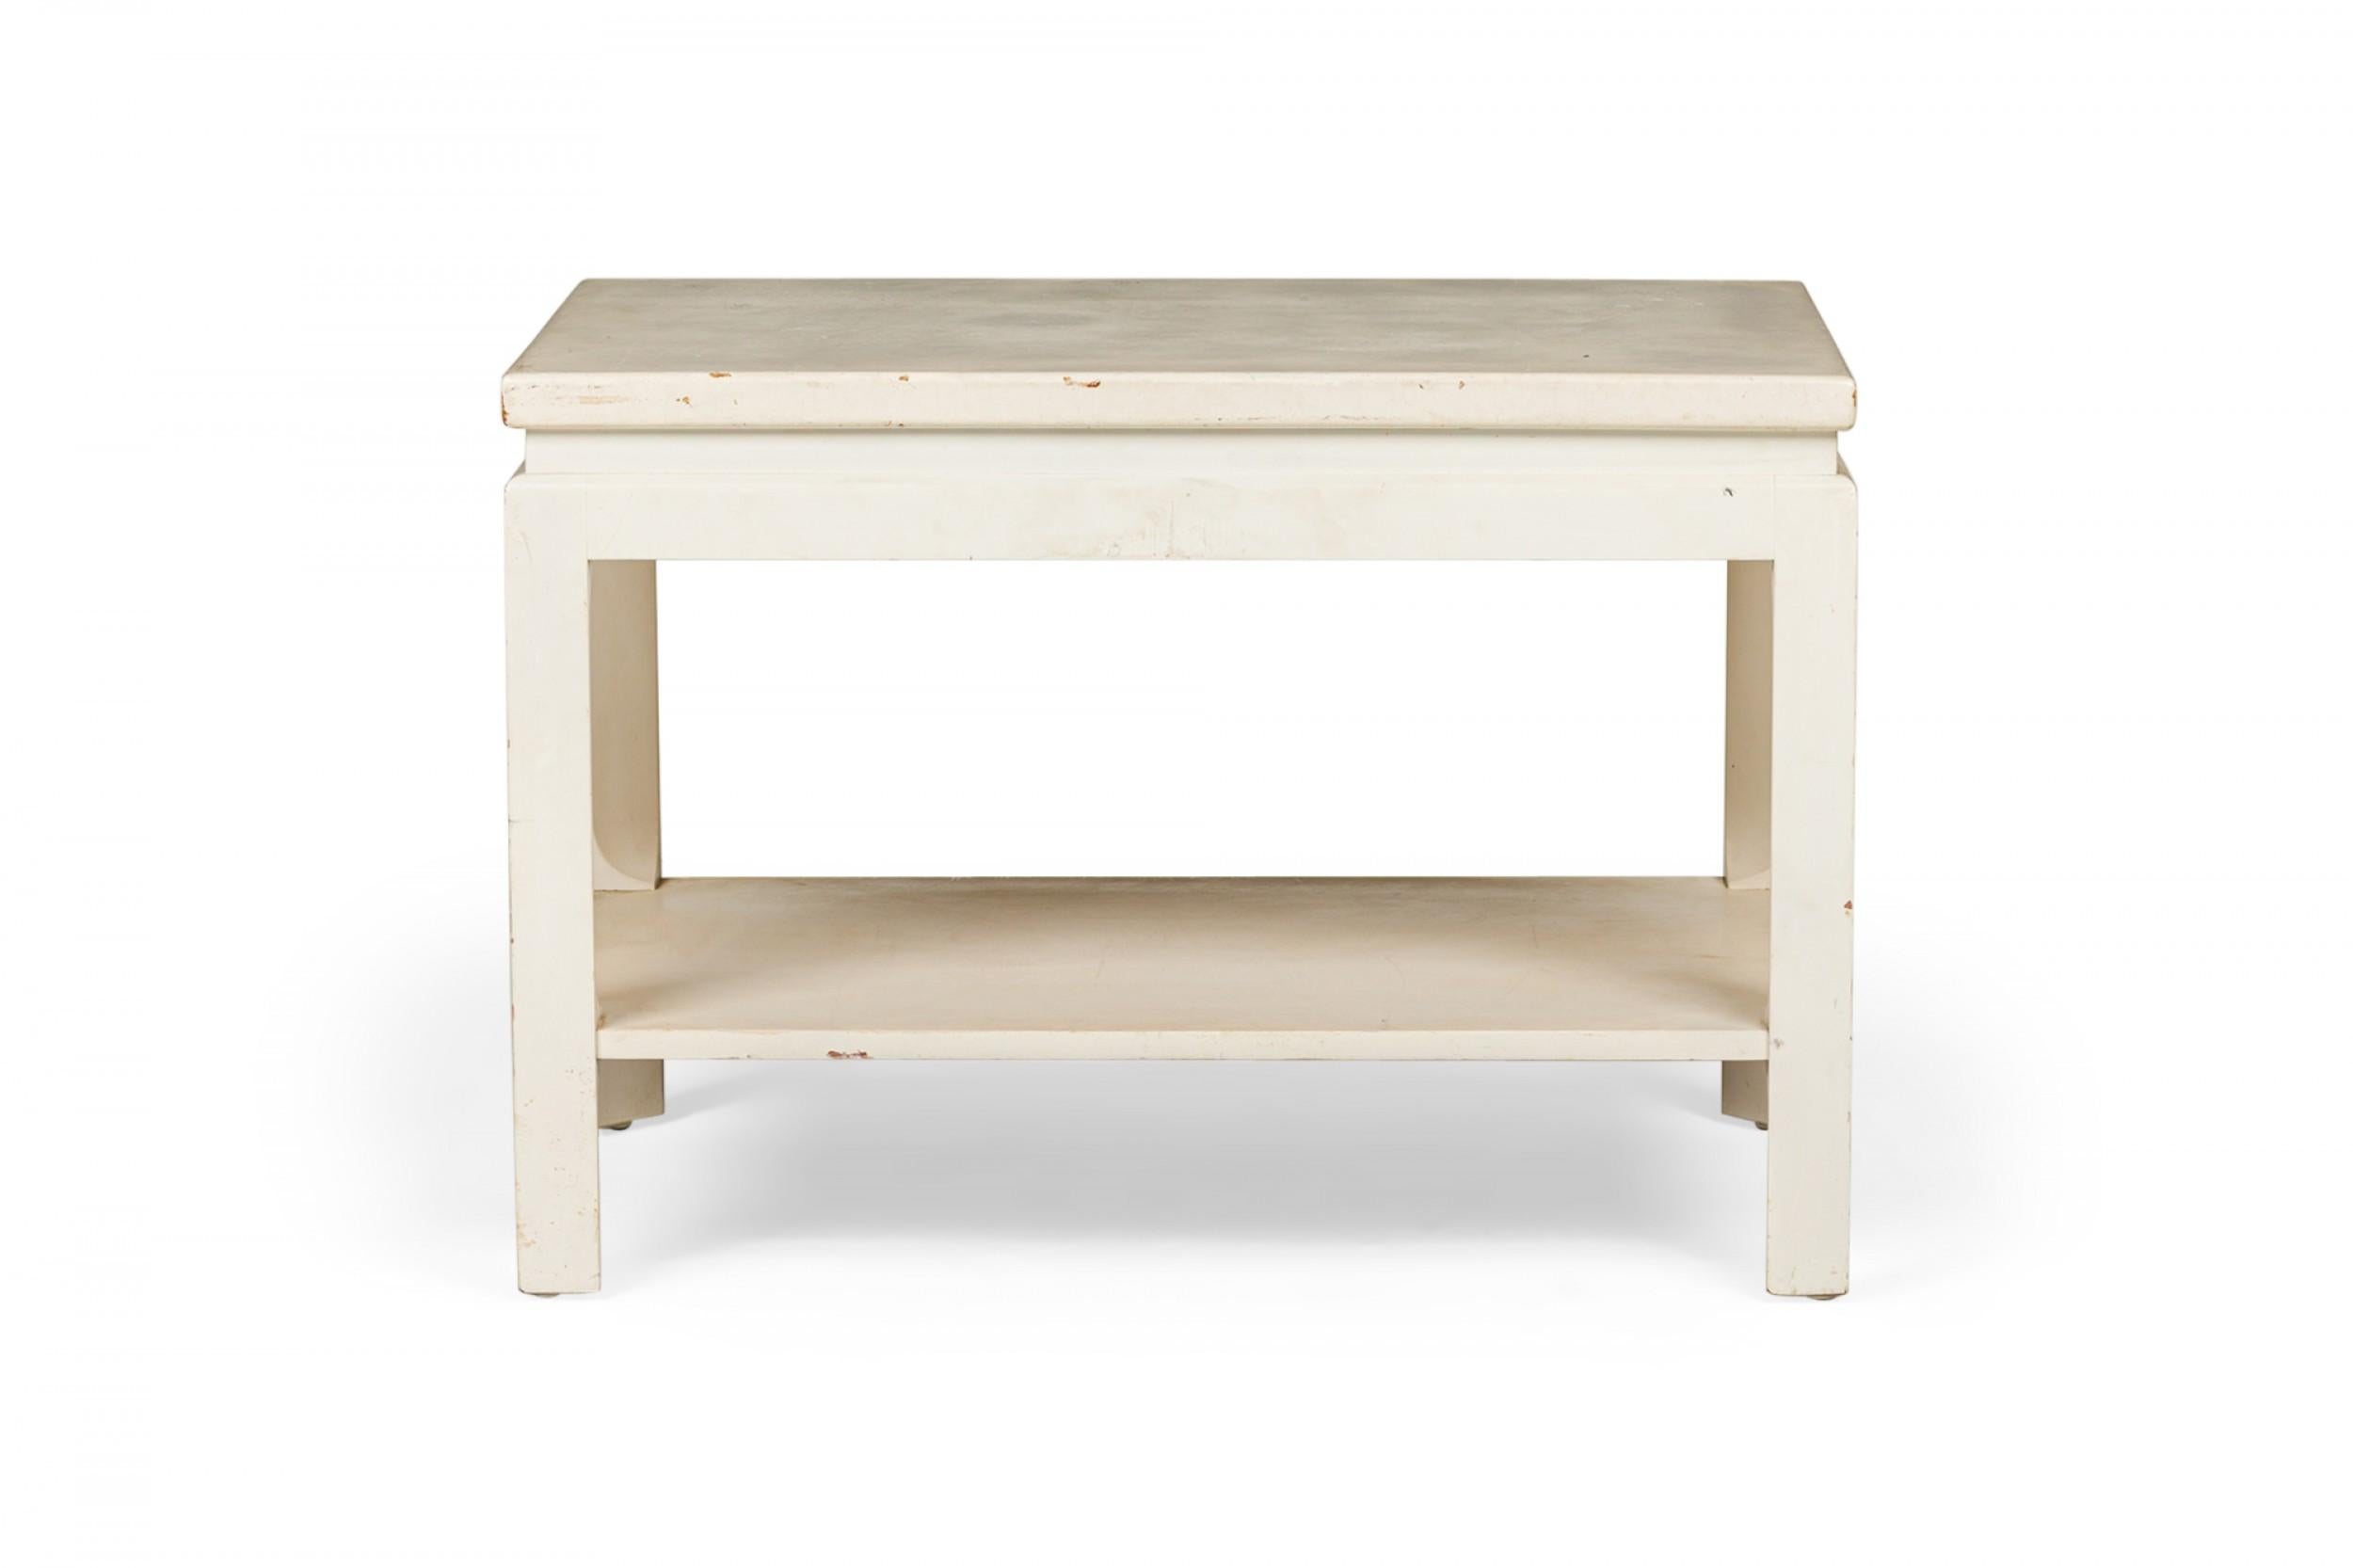 Mid-Century rectangular end / side table with a white painted cork top resting on a white painted wooden frame with a lower rectangular stretcher shelf and four square legs. (PAUL FRANKL FOR JOHNSON FURNITURE COMPANY)(Similar tables: DUF0726,